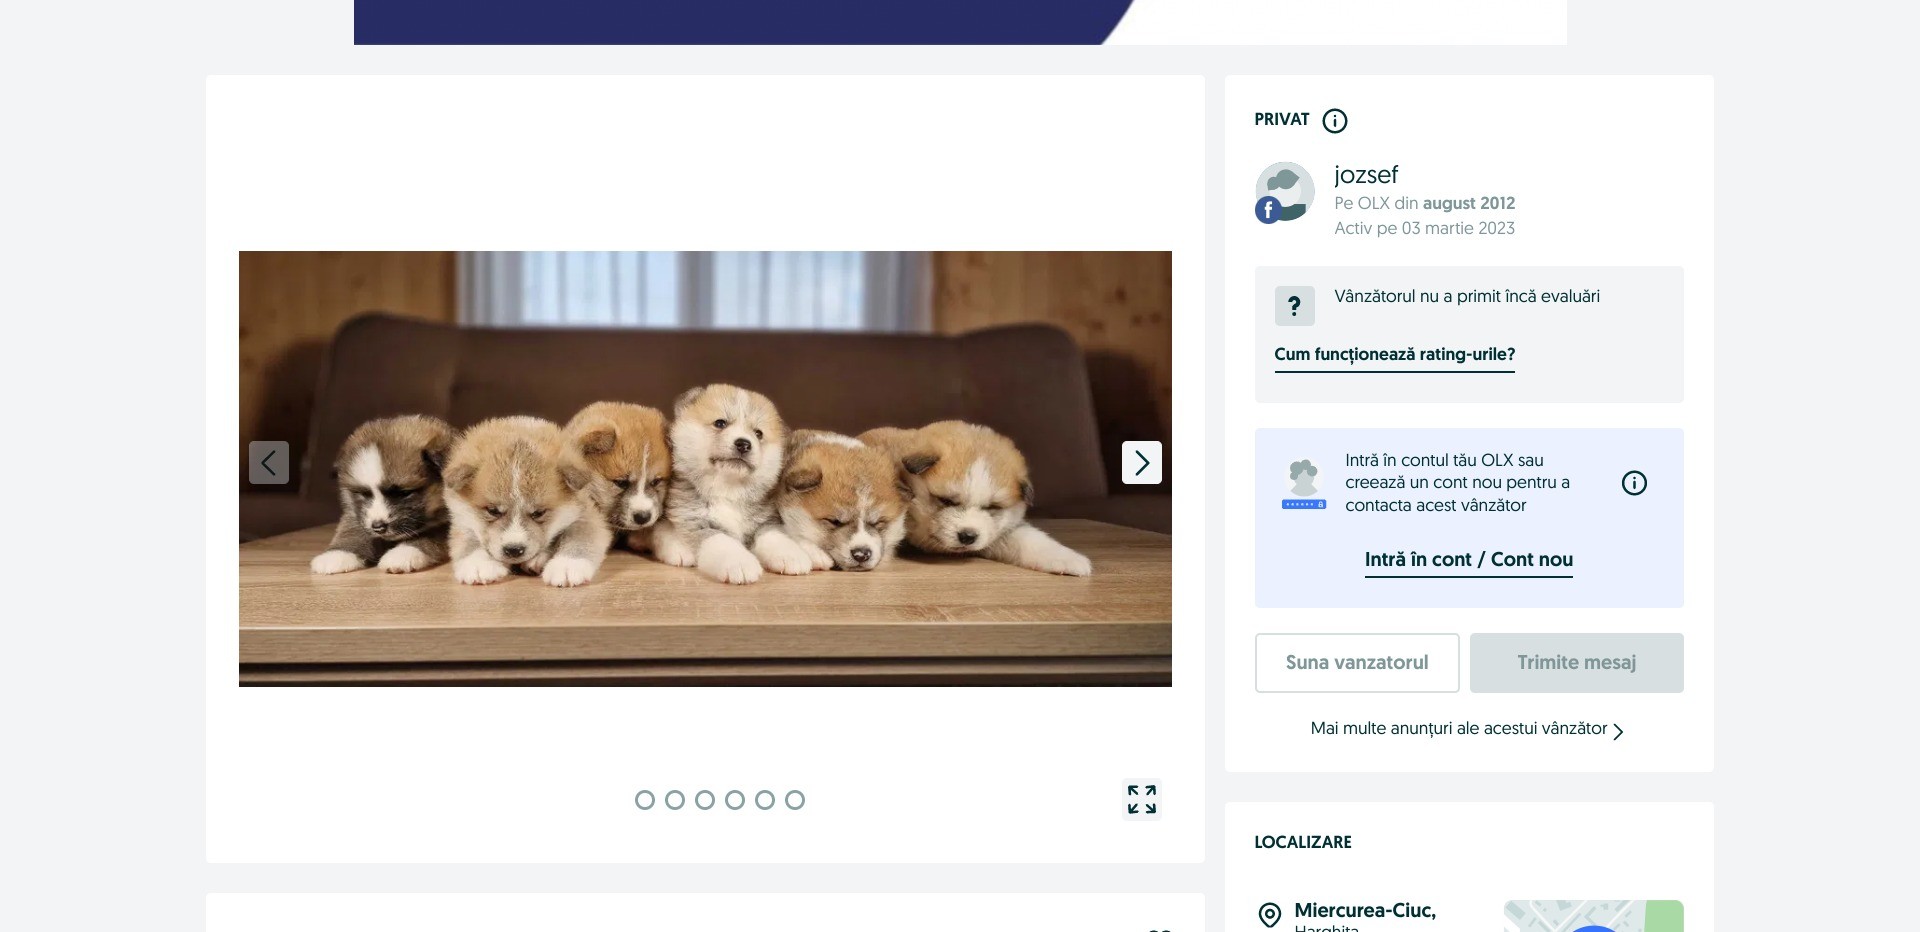 Screenshot of a random listing on olx.ro displaying puppies for sale